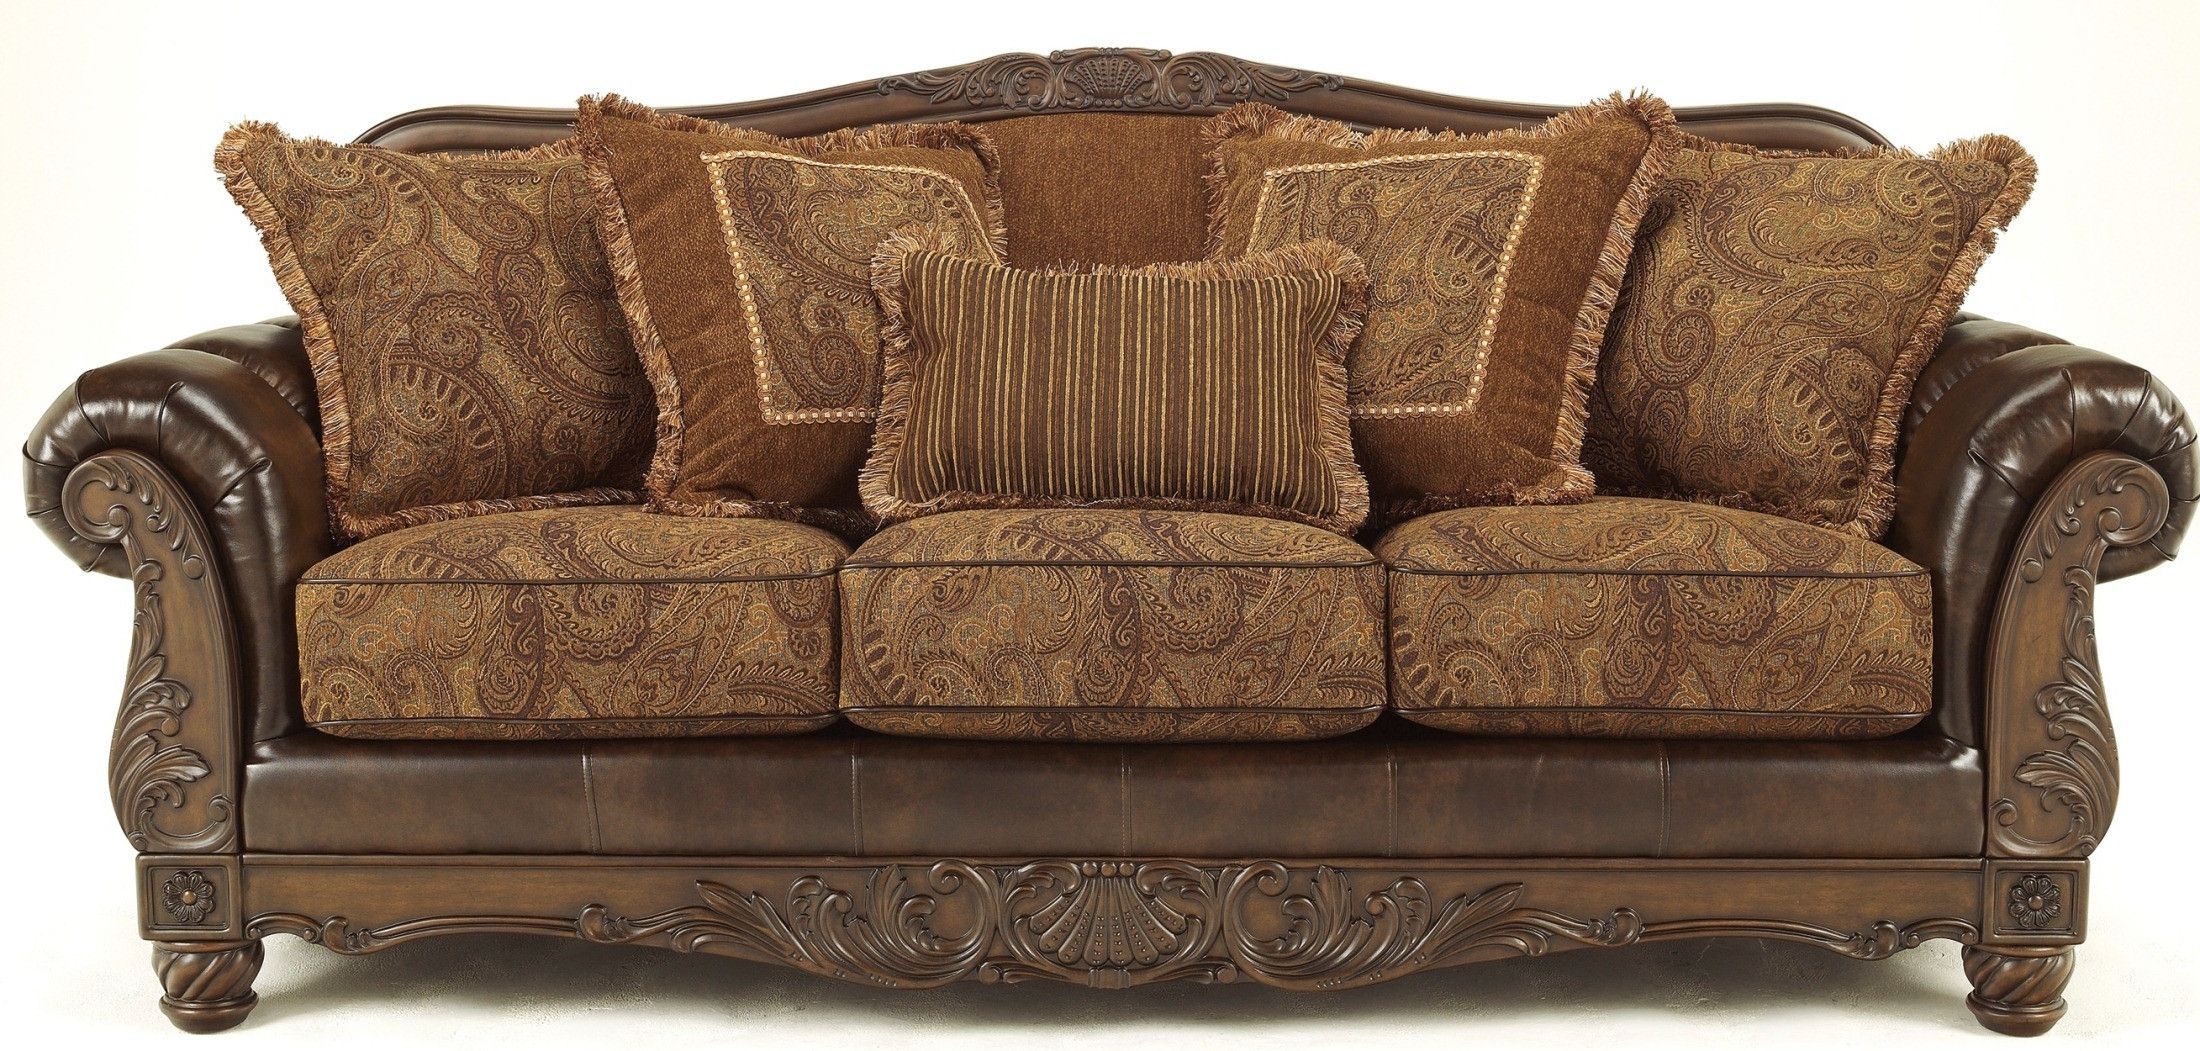 Best And Newest Antique Sofas For Fresco Durablend Antique Sofa From Ashley (6310038) (View 1 of 15)